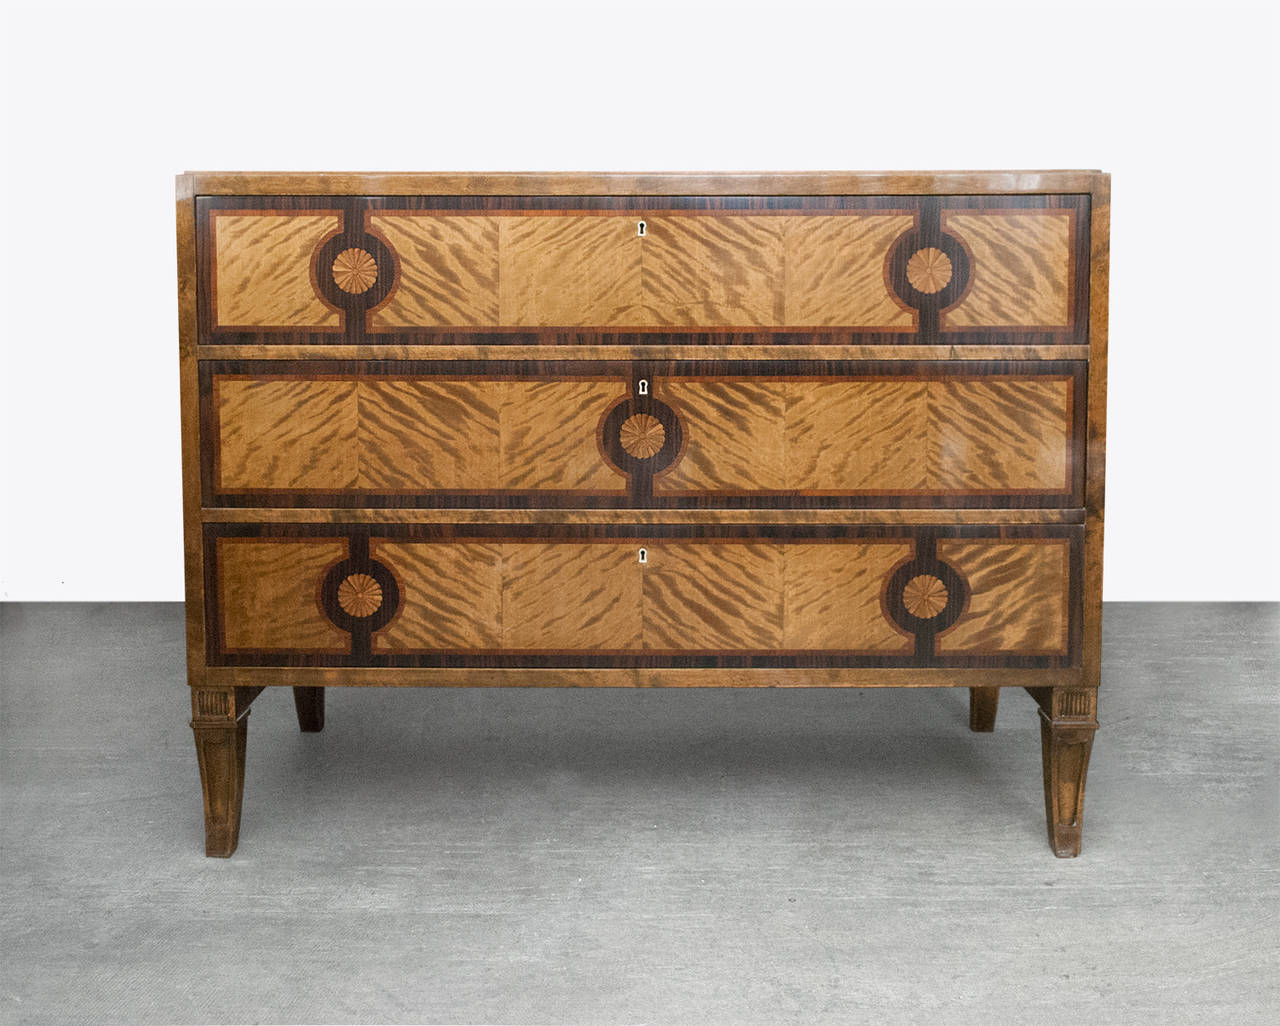 A Swedish Art Deco chest of drawers with marquetry in Macassar ebony, rosewood and other woods. The chest's design is in the manner of early Carl Malmsten's designs made by Bodafors. Made from solid stained birch the chest features four carved sabre